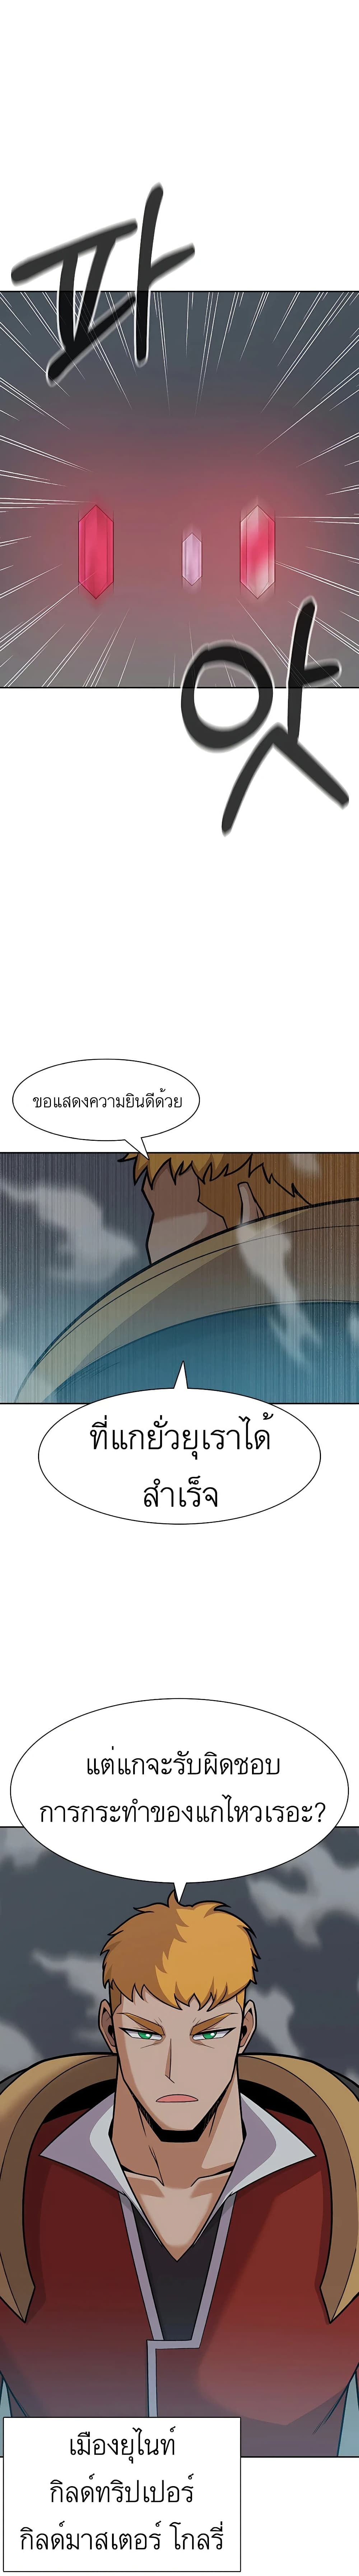 Raising Newbie Heroes In Another World ตอนที่ 19 (5)